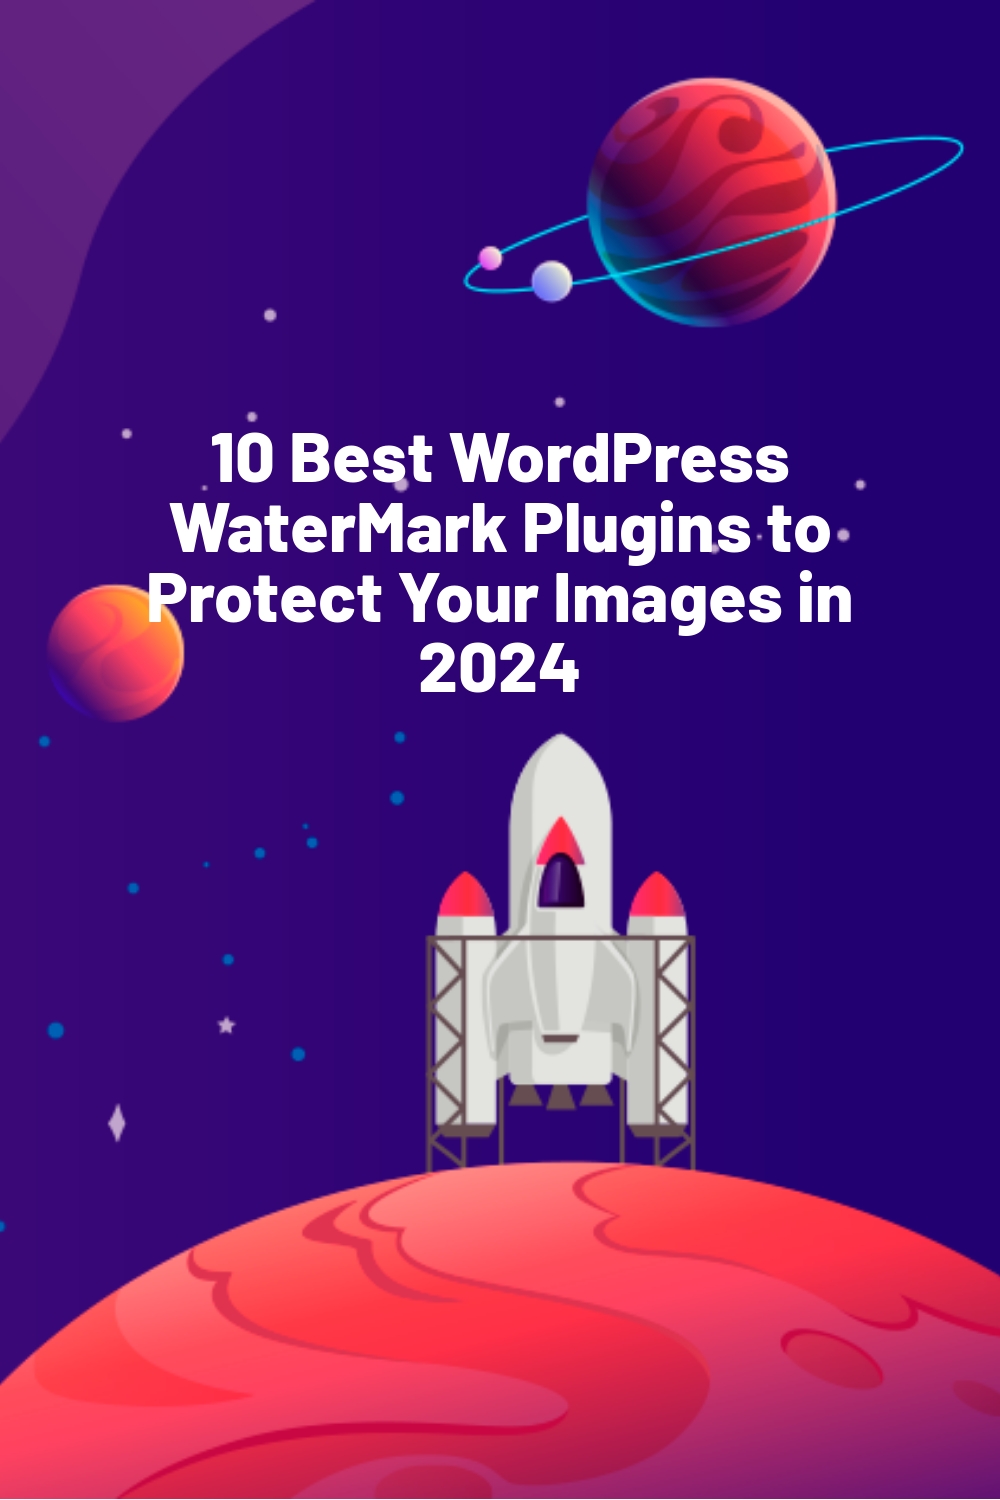 10 Best WordPress WaterMark Plugins to Protect Your Images in 2024